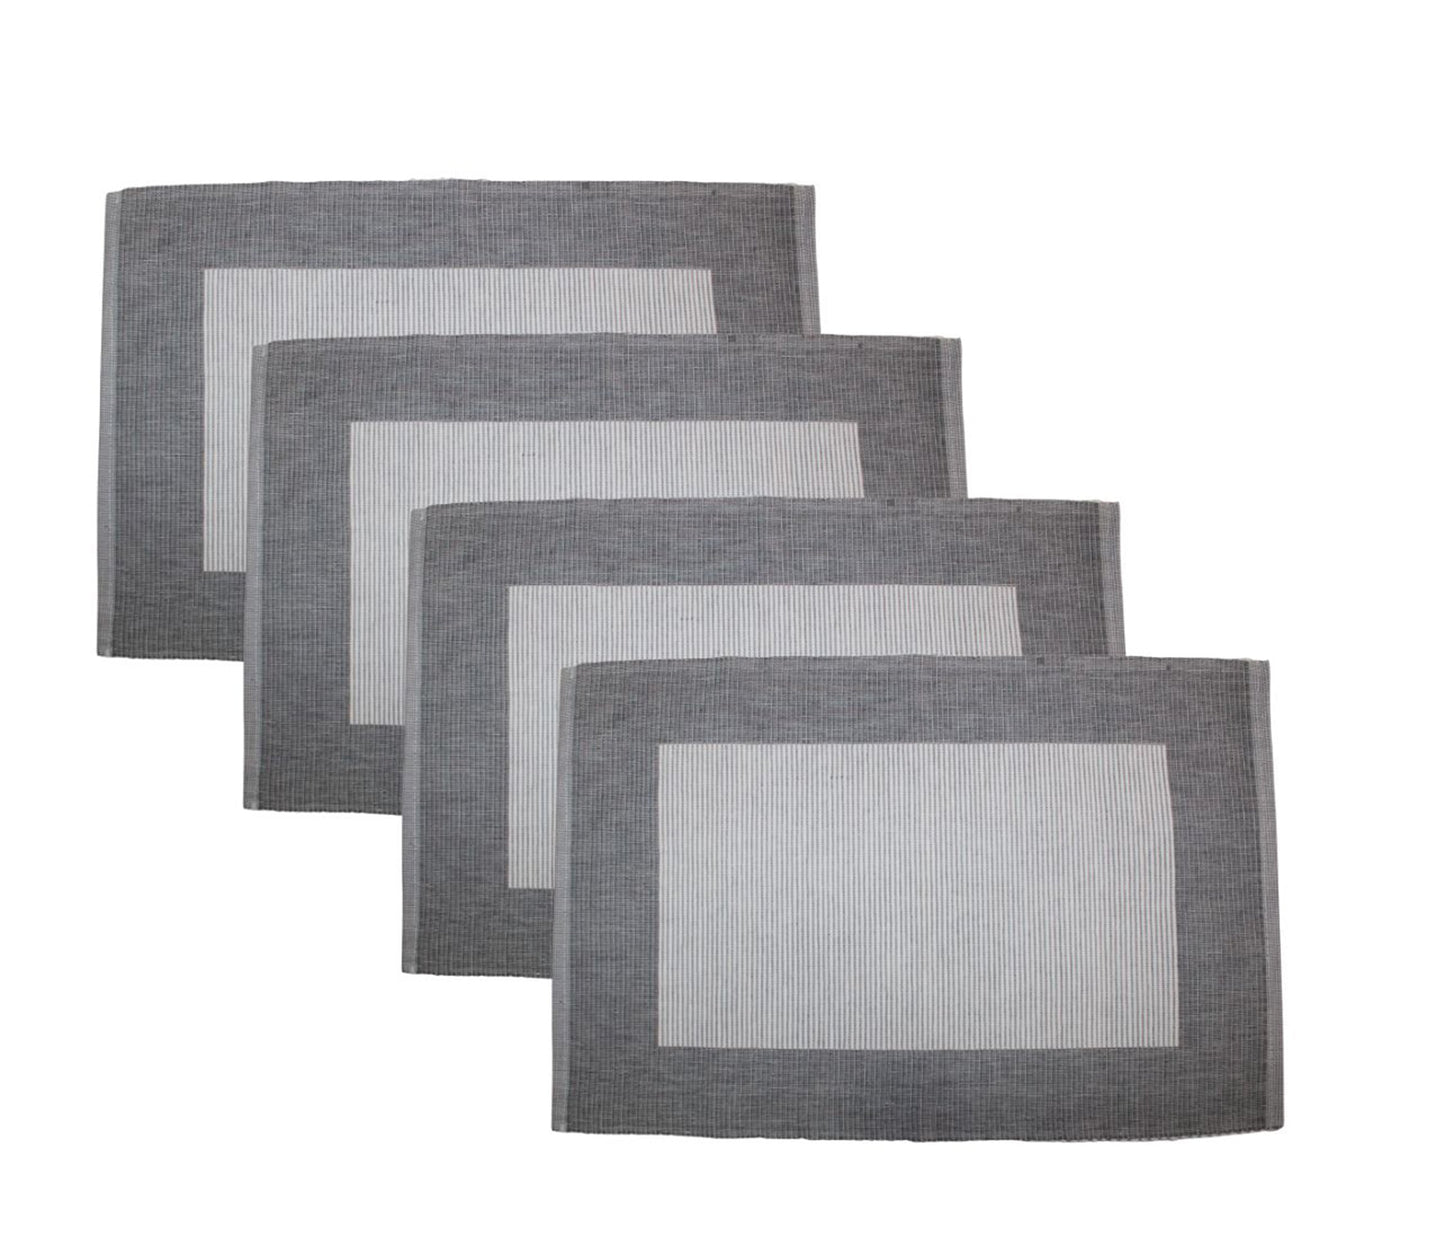 Lushomes Table Mat dining table mat kitchen mat table mats set of 4 dining table accessories for home Grey placemats Ribbed Food Mat mats for kitchen 13x19 Inch 33x48 Cms Pack of 4